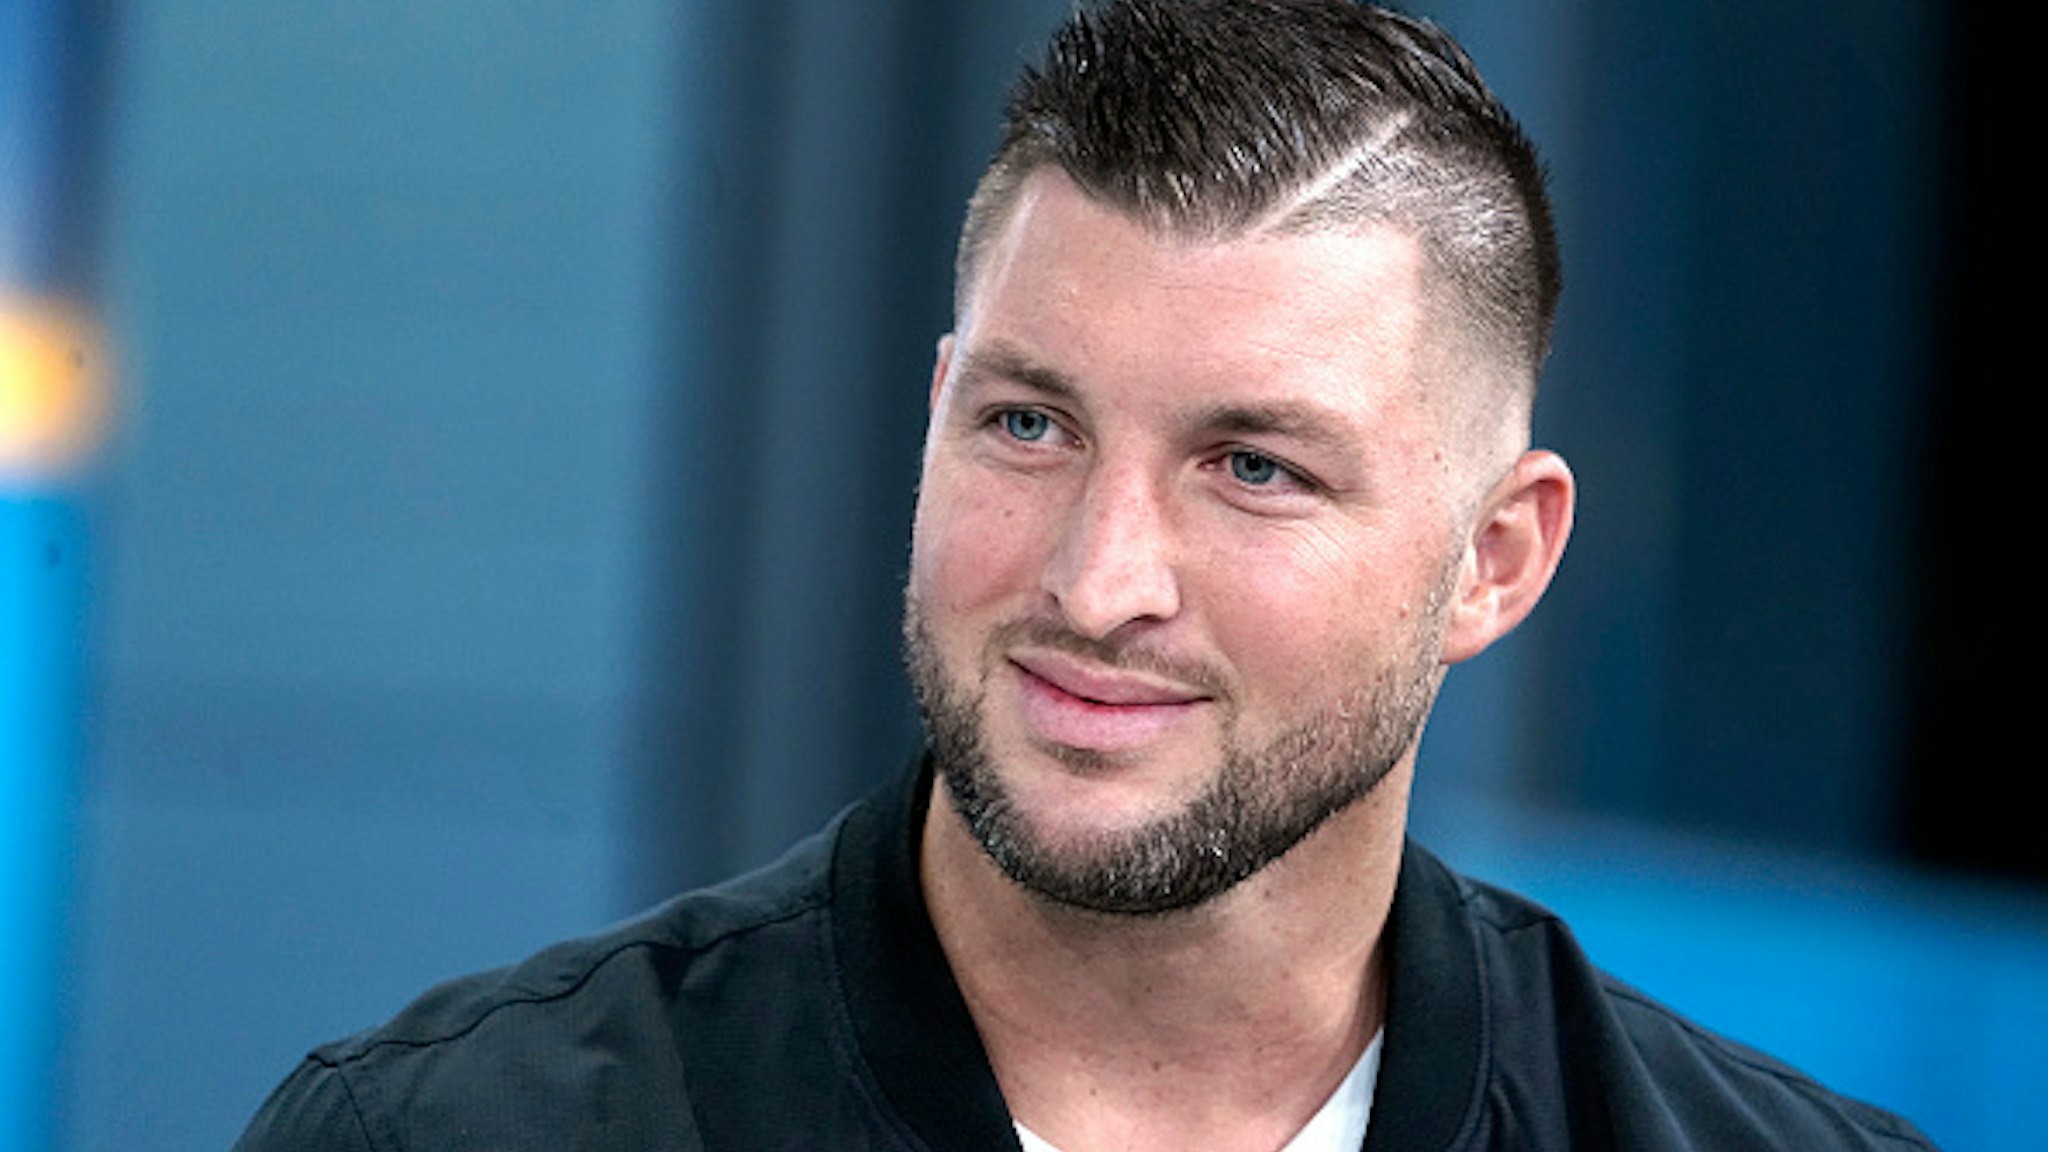 NEW YORK, NEW YORK - OCTOBER 09: Professional baseball player Tim Tebow visits "Fox &amp; Friends" at Fox News Channel Studios on October 09, 2019 in New York City.